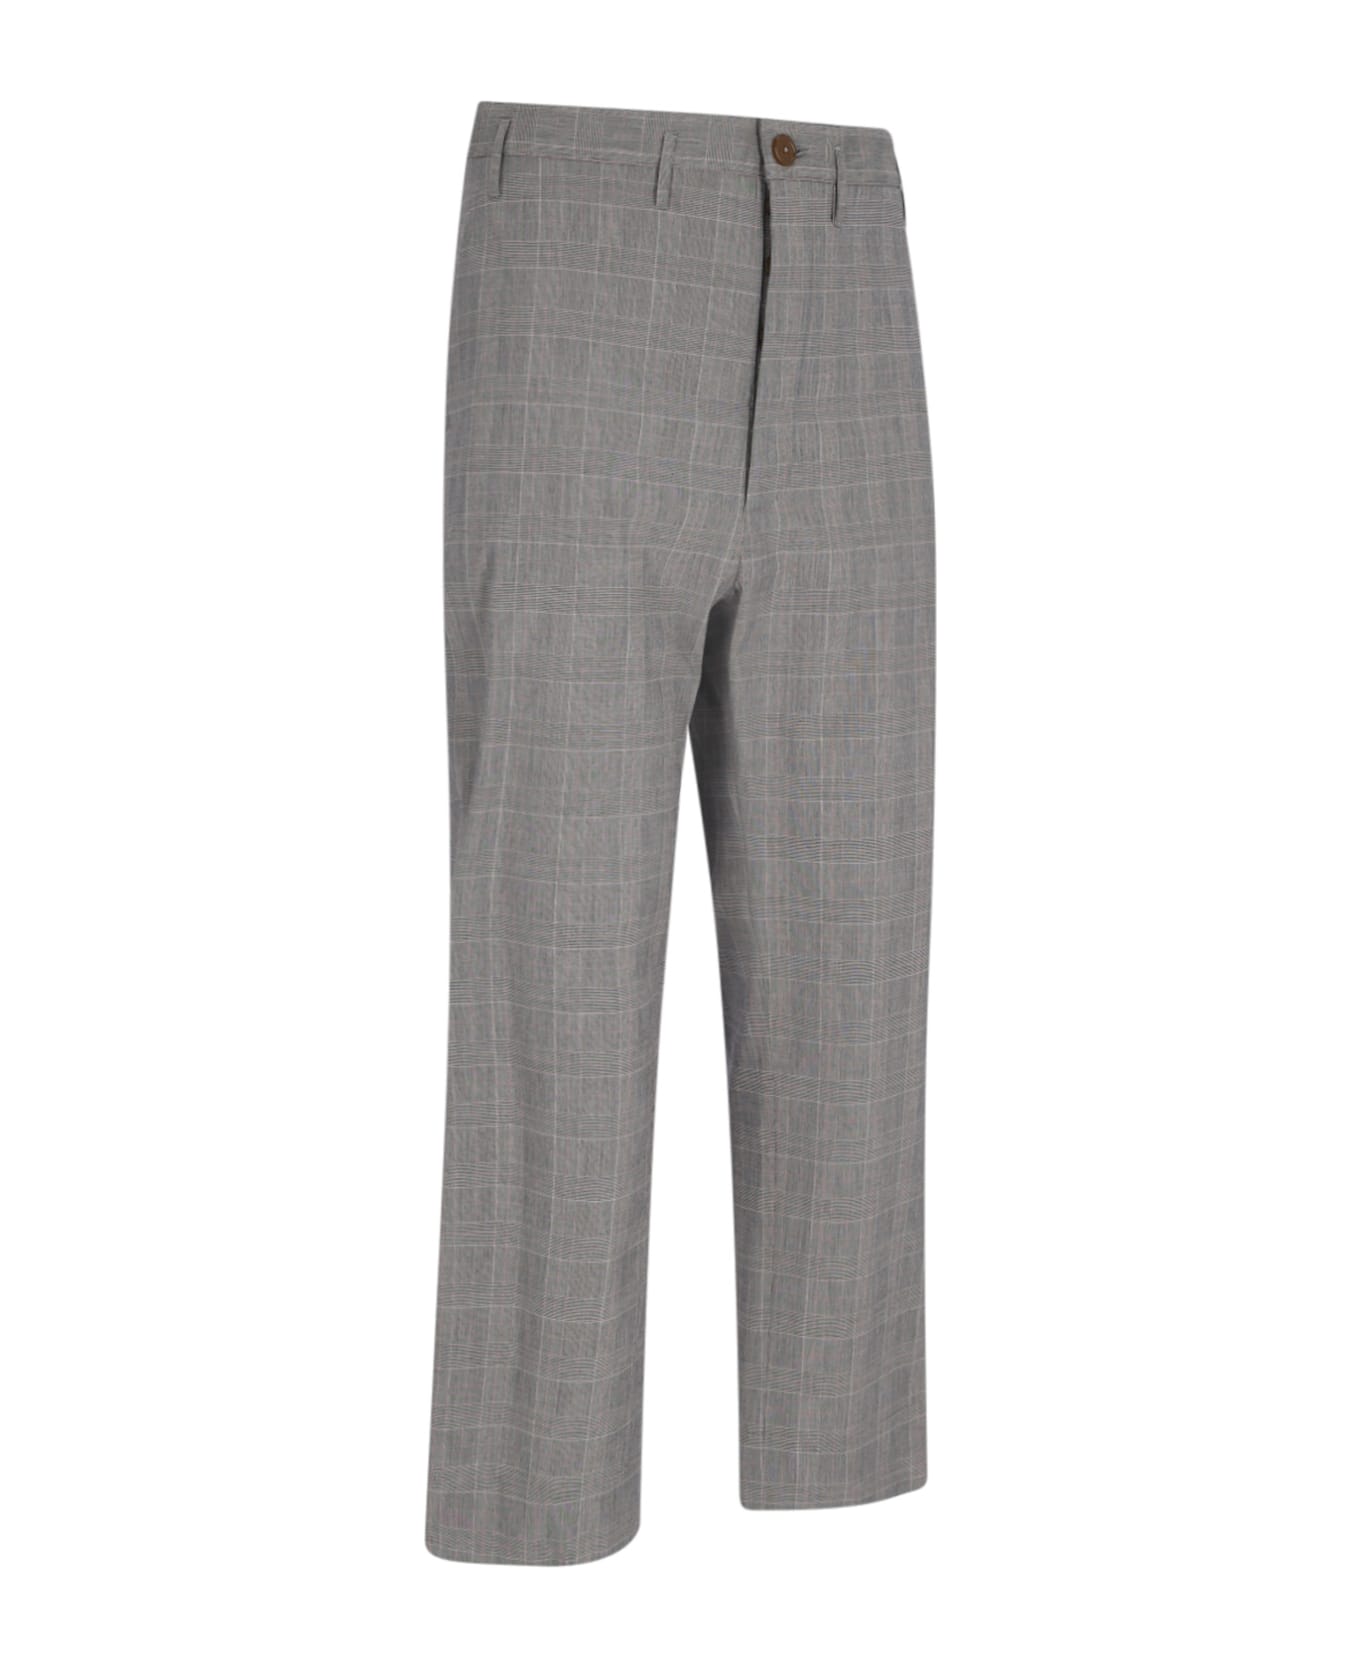 Vivienne Westwood Cropped Trousers - Gray ボトムス